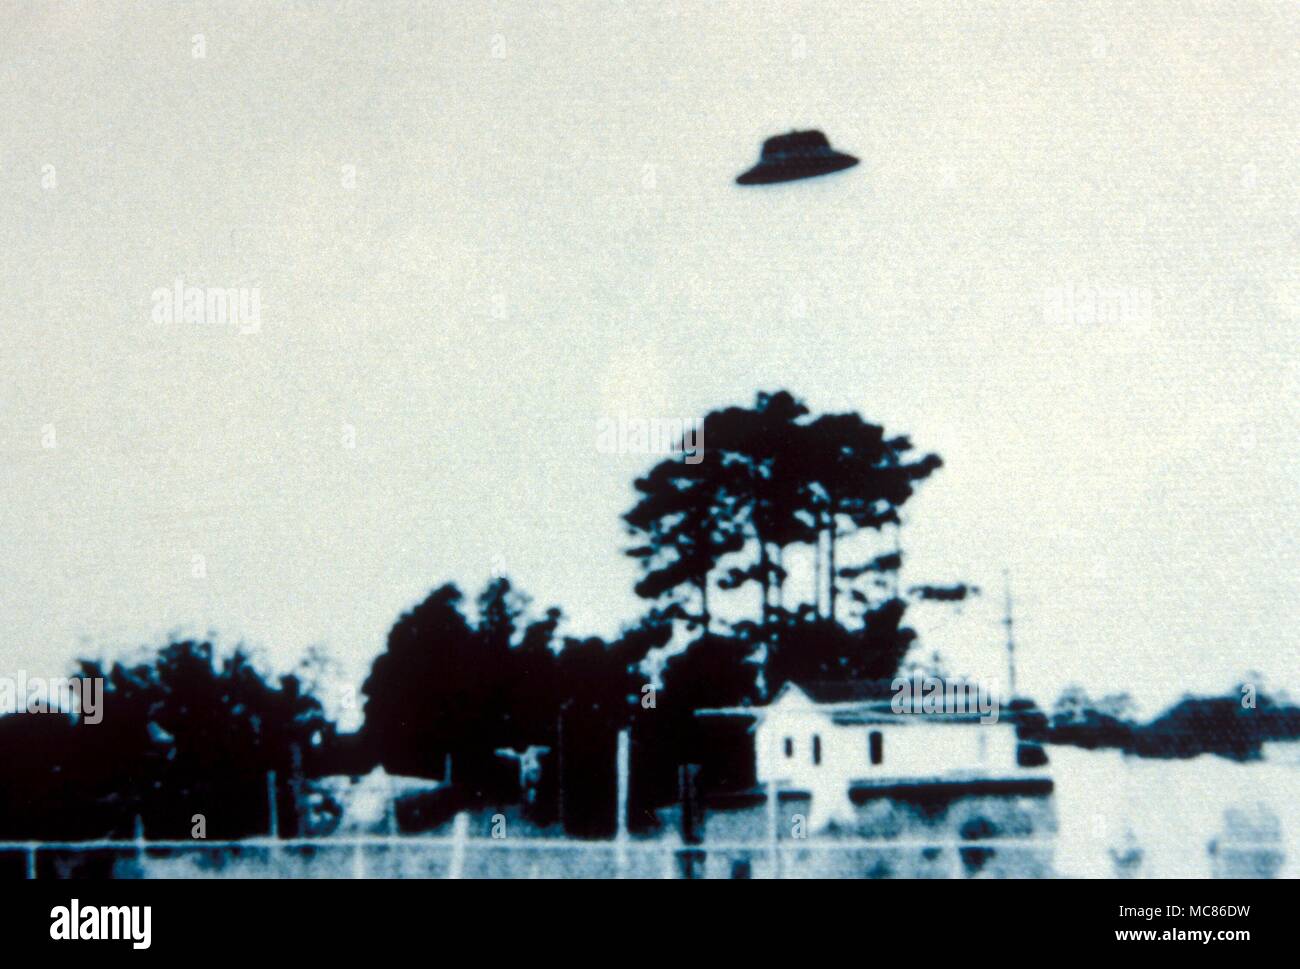 UFO - unidentified flying object Photograph of ufo over Bermuda, photographed by Jammie Romee, 13 September 1964 Stock Photo